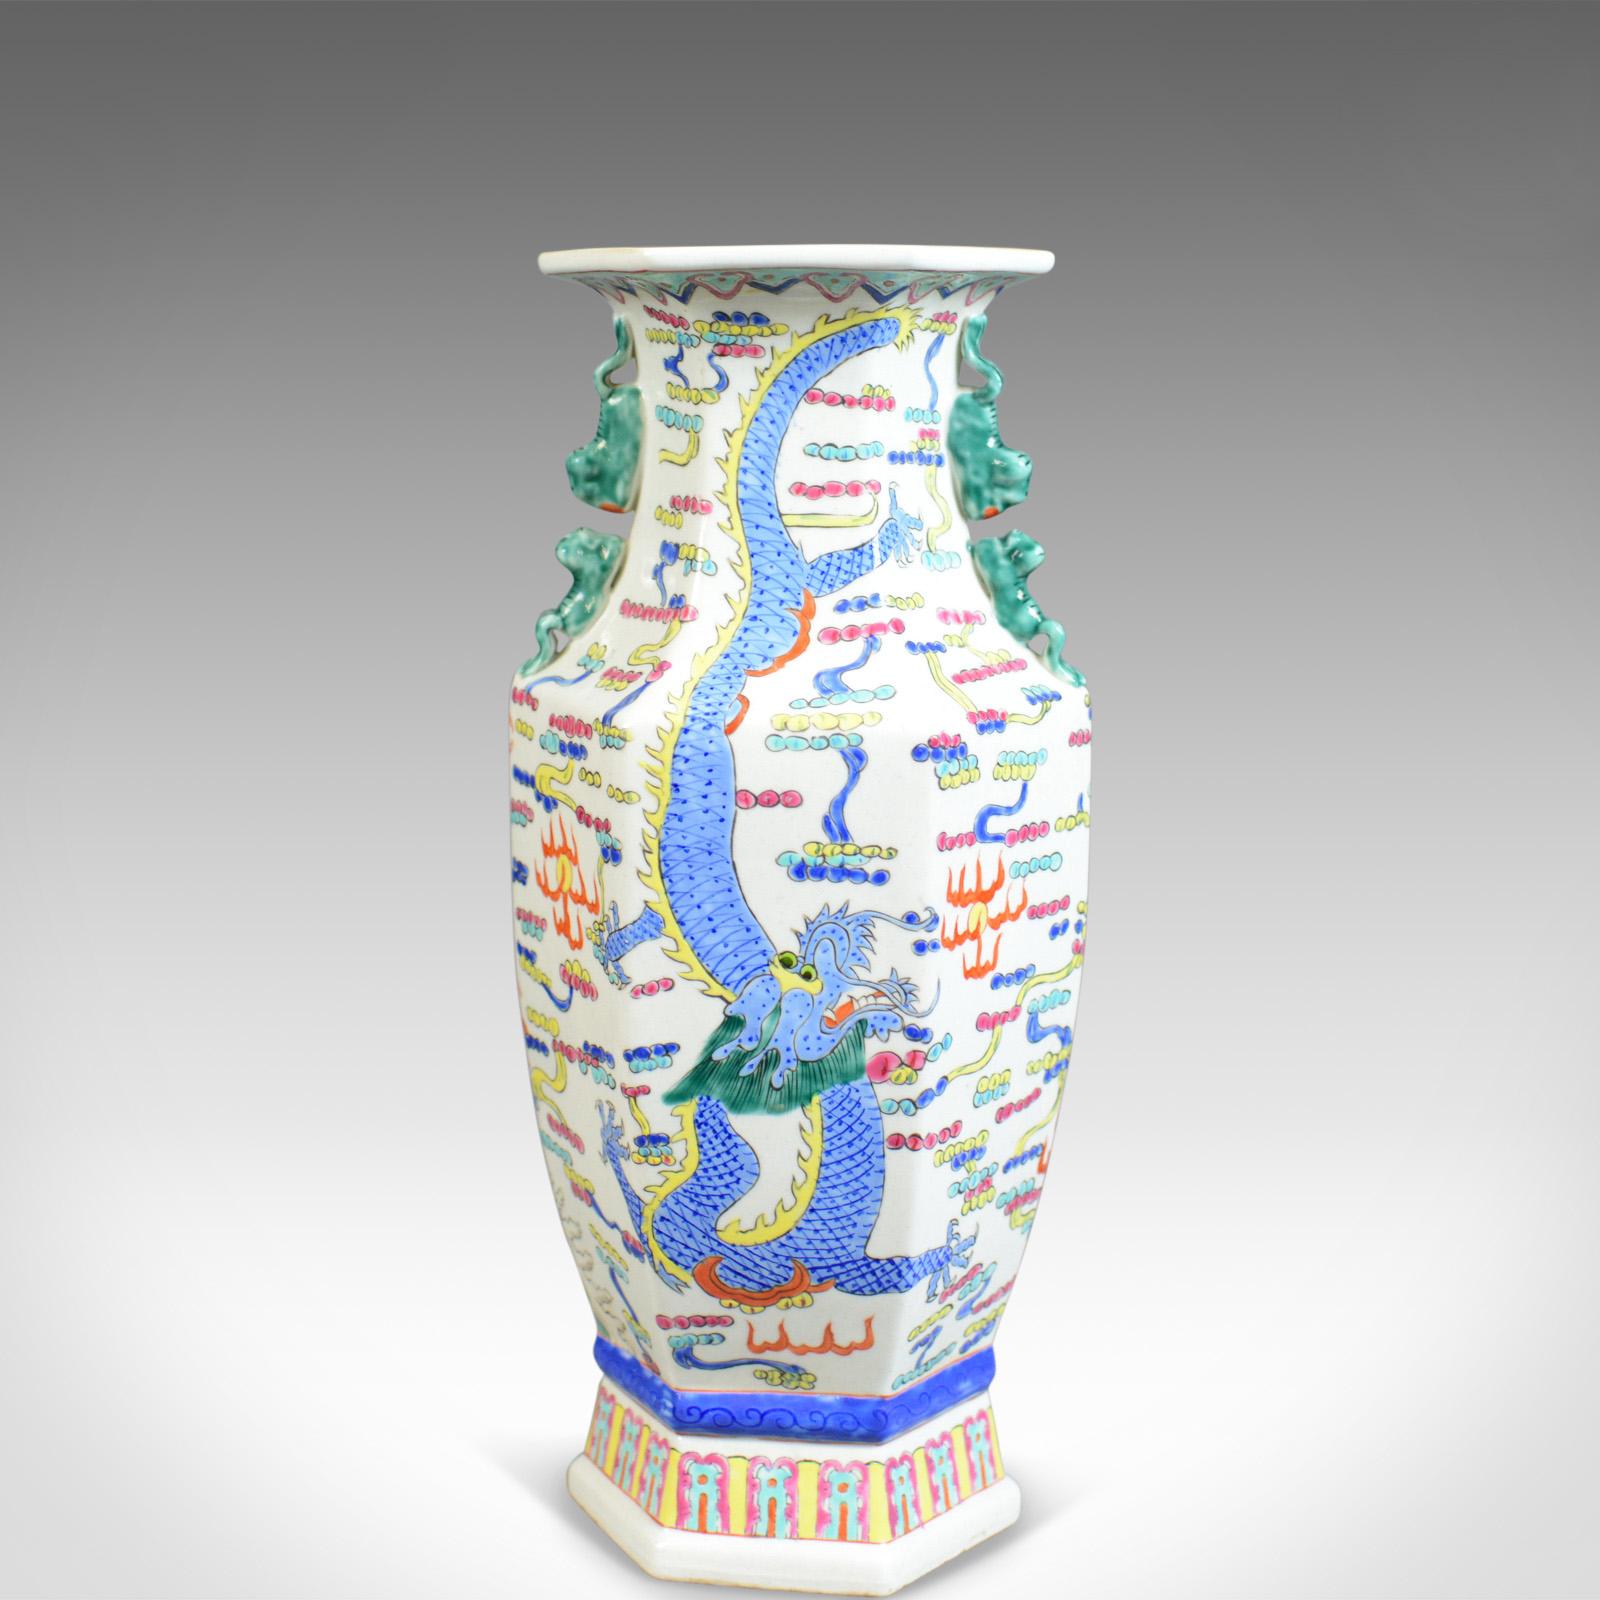 This is a midcentury Chinese hexagonal baluster vase, a 20th century, oriental ceramic urn. 

Imposing quality ceramic vase
Profusely decorated from neck to base
Free-from any damage or marks, unmarked base

Opposing red and blue dragons on a